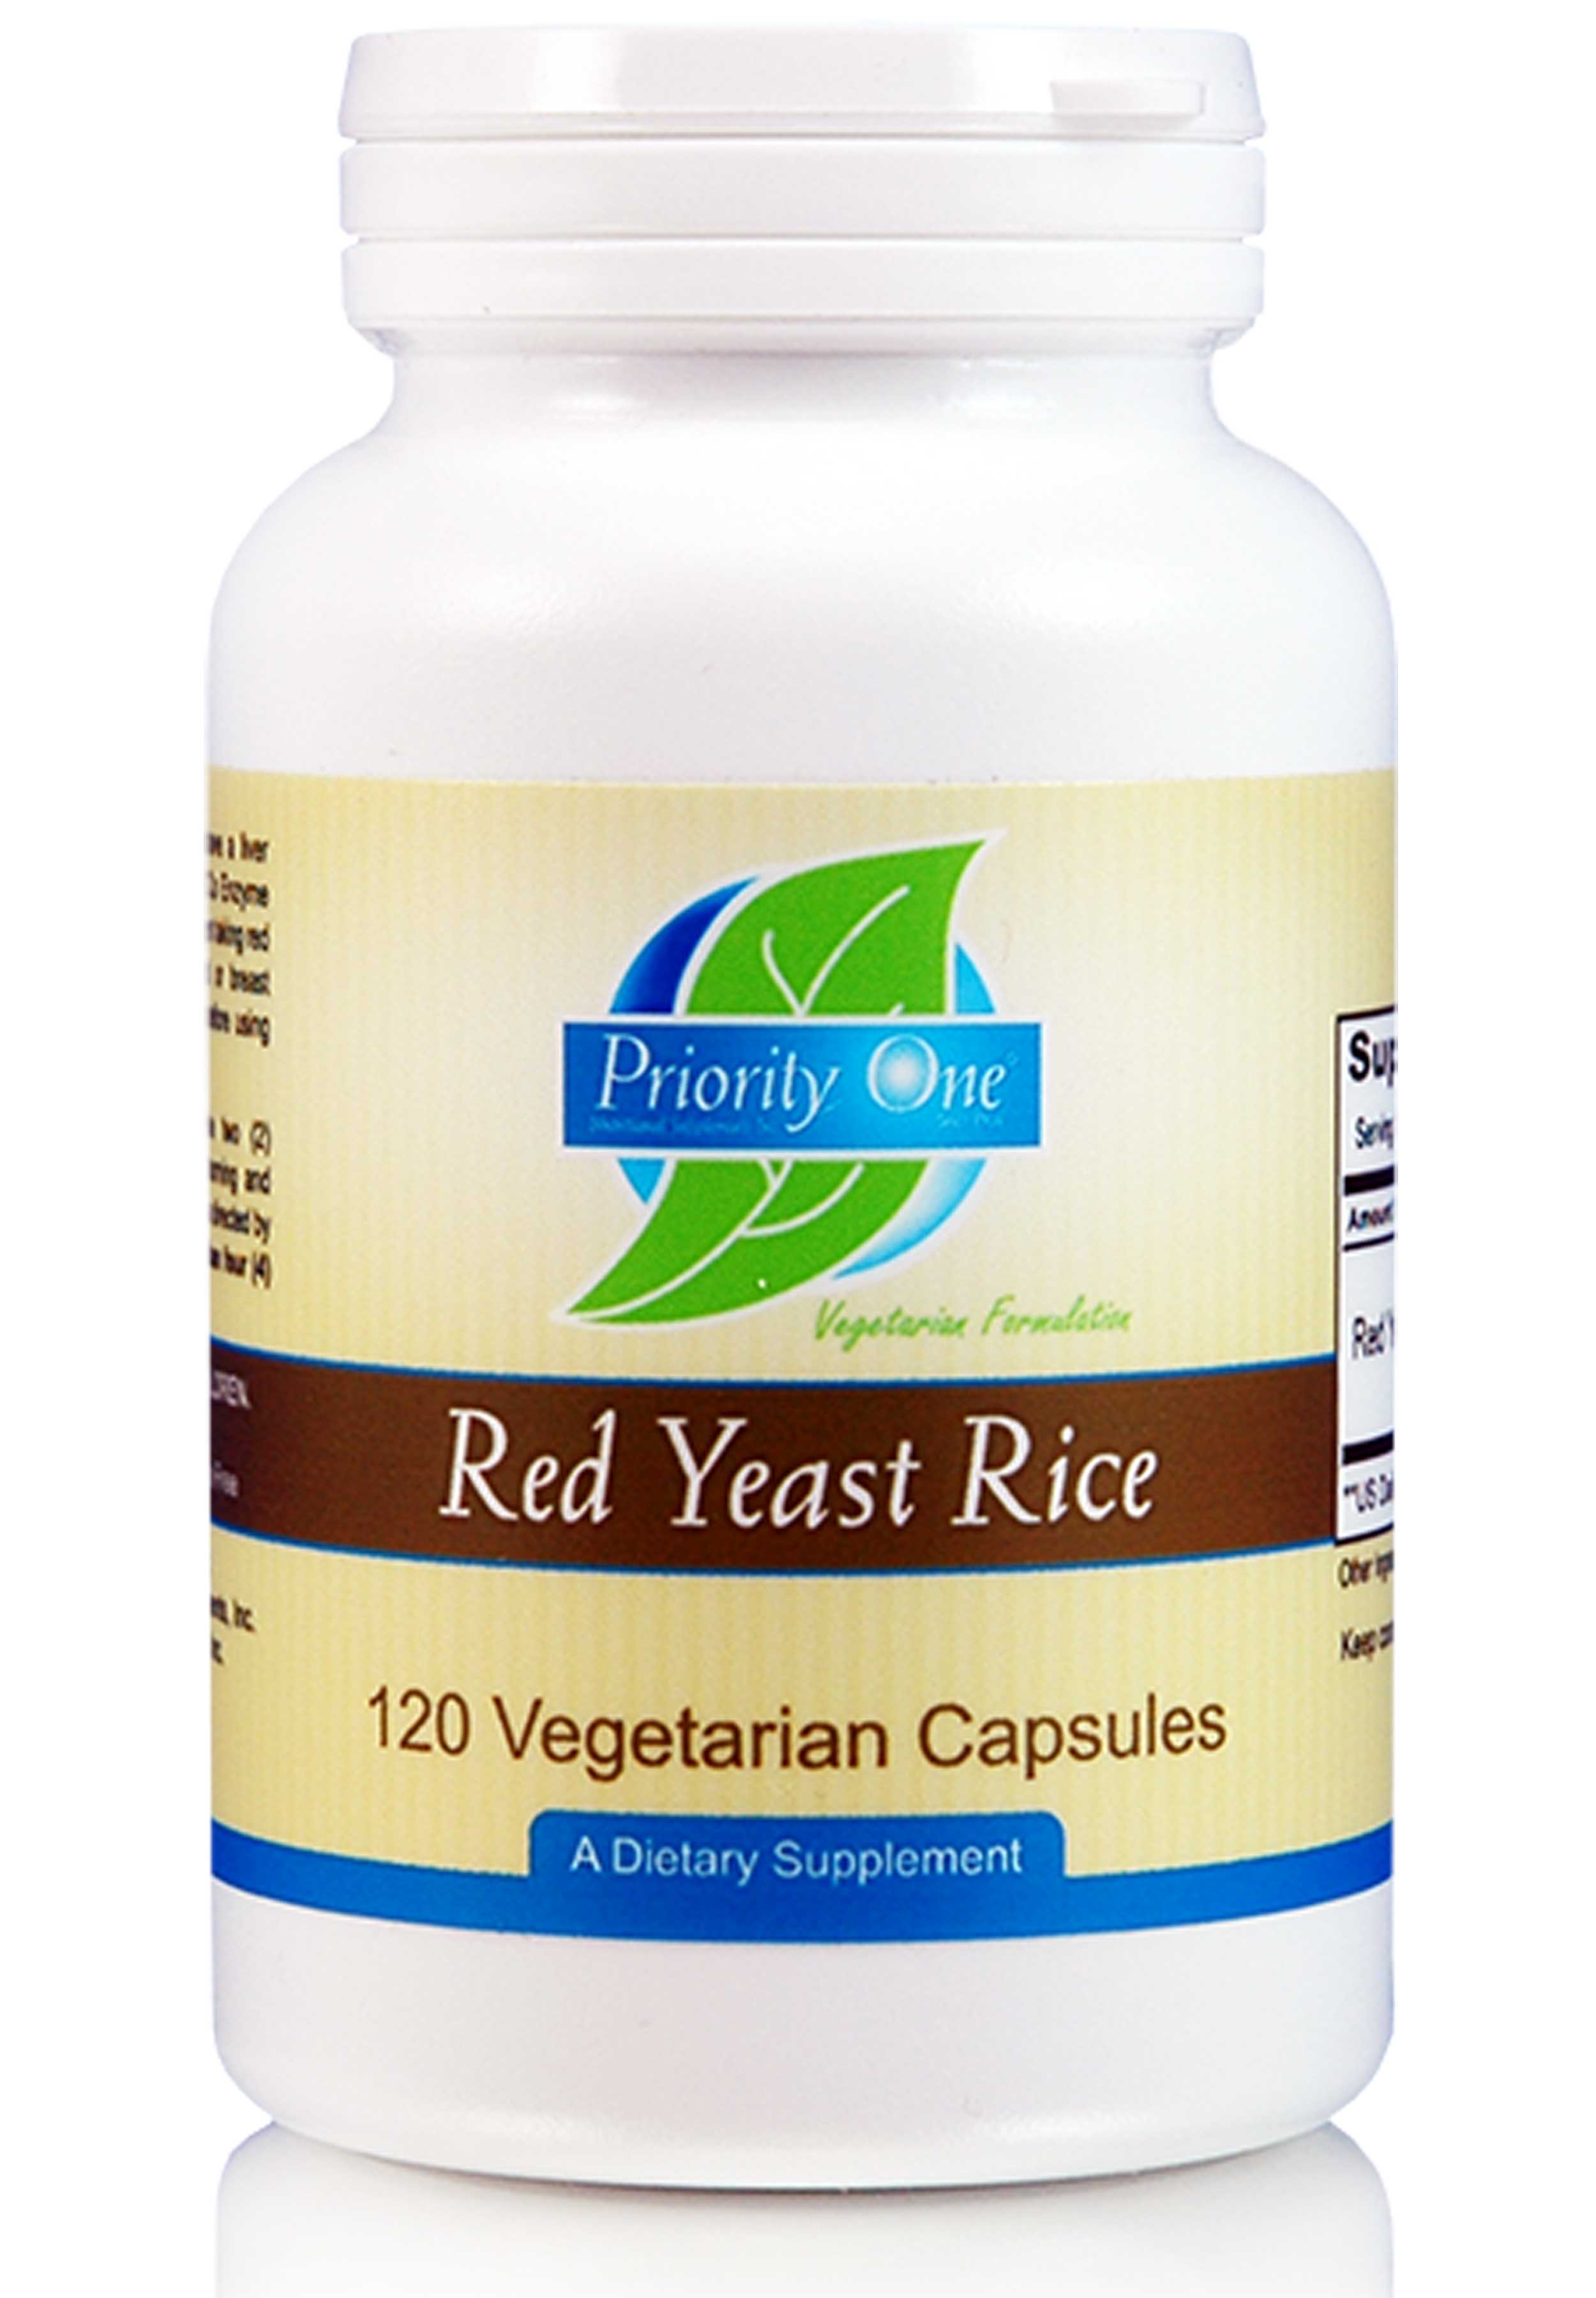 Priority One Red Yeast Rice